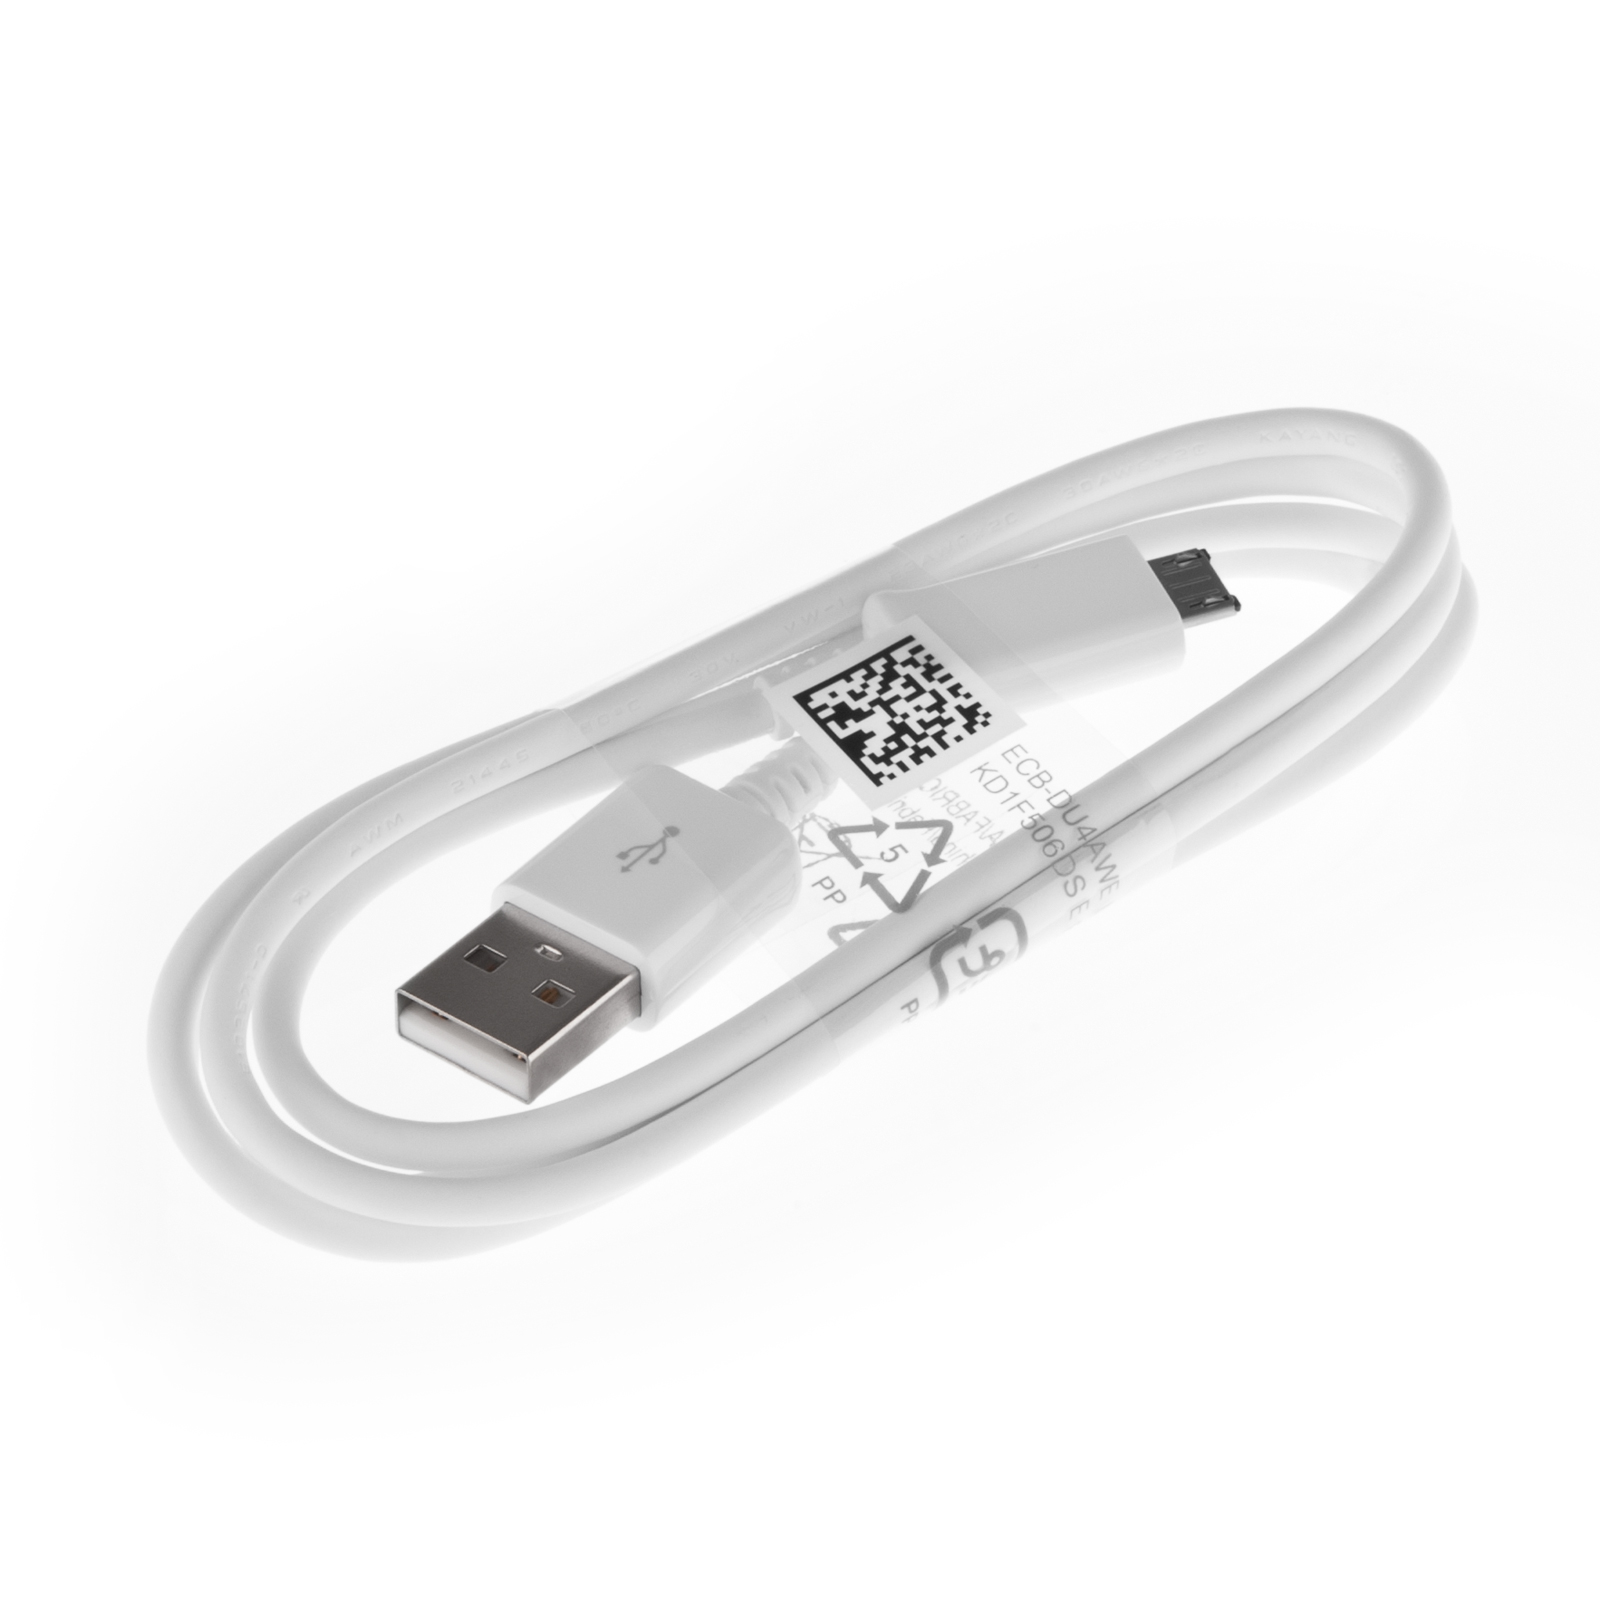 Official Samsung USB A to Micro-B Sync and Charger Data Cable ECB-DU4AWE